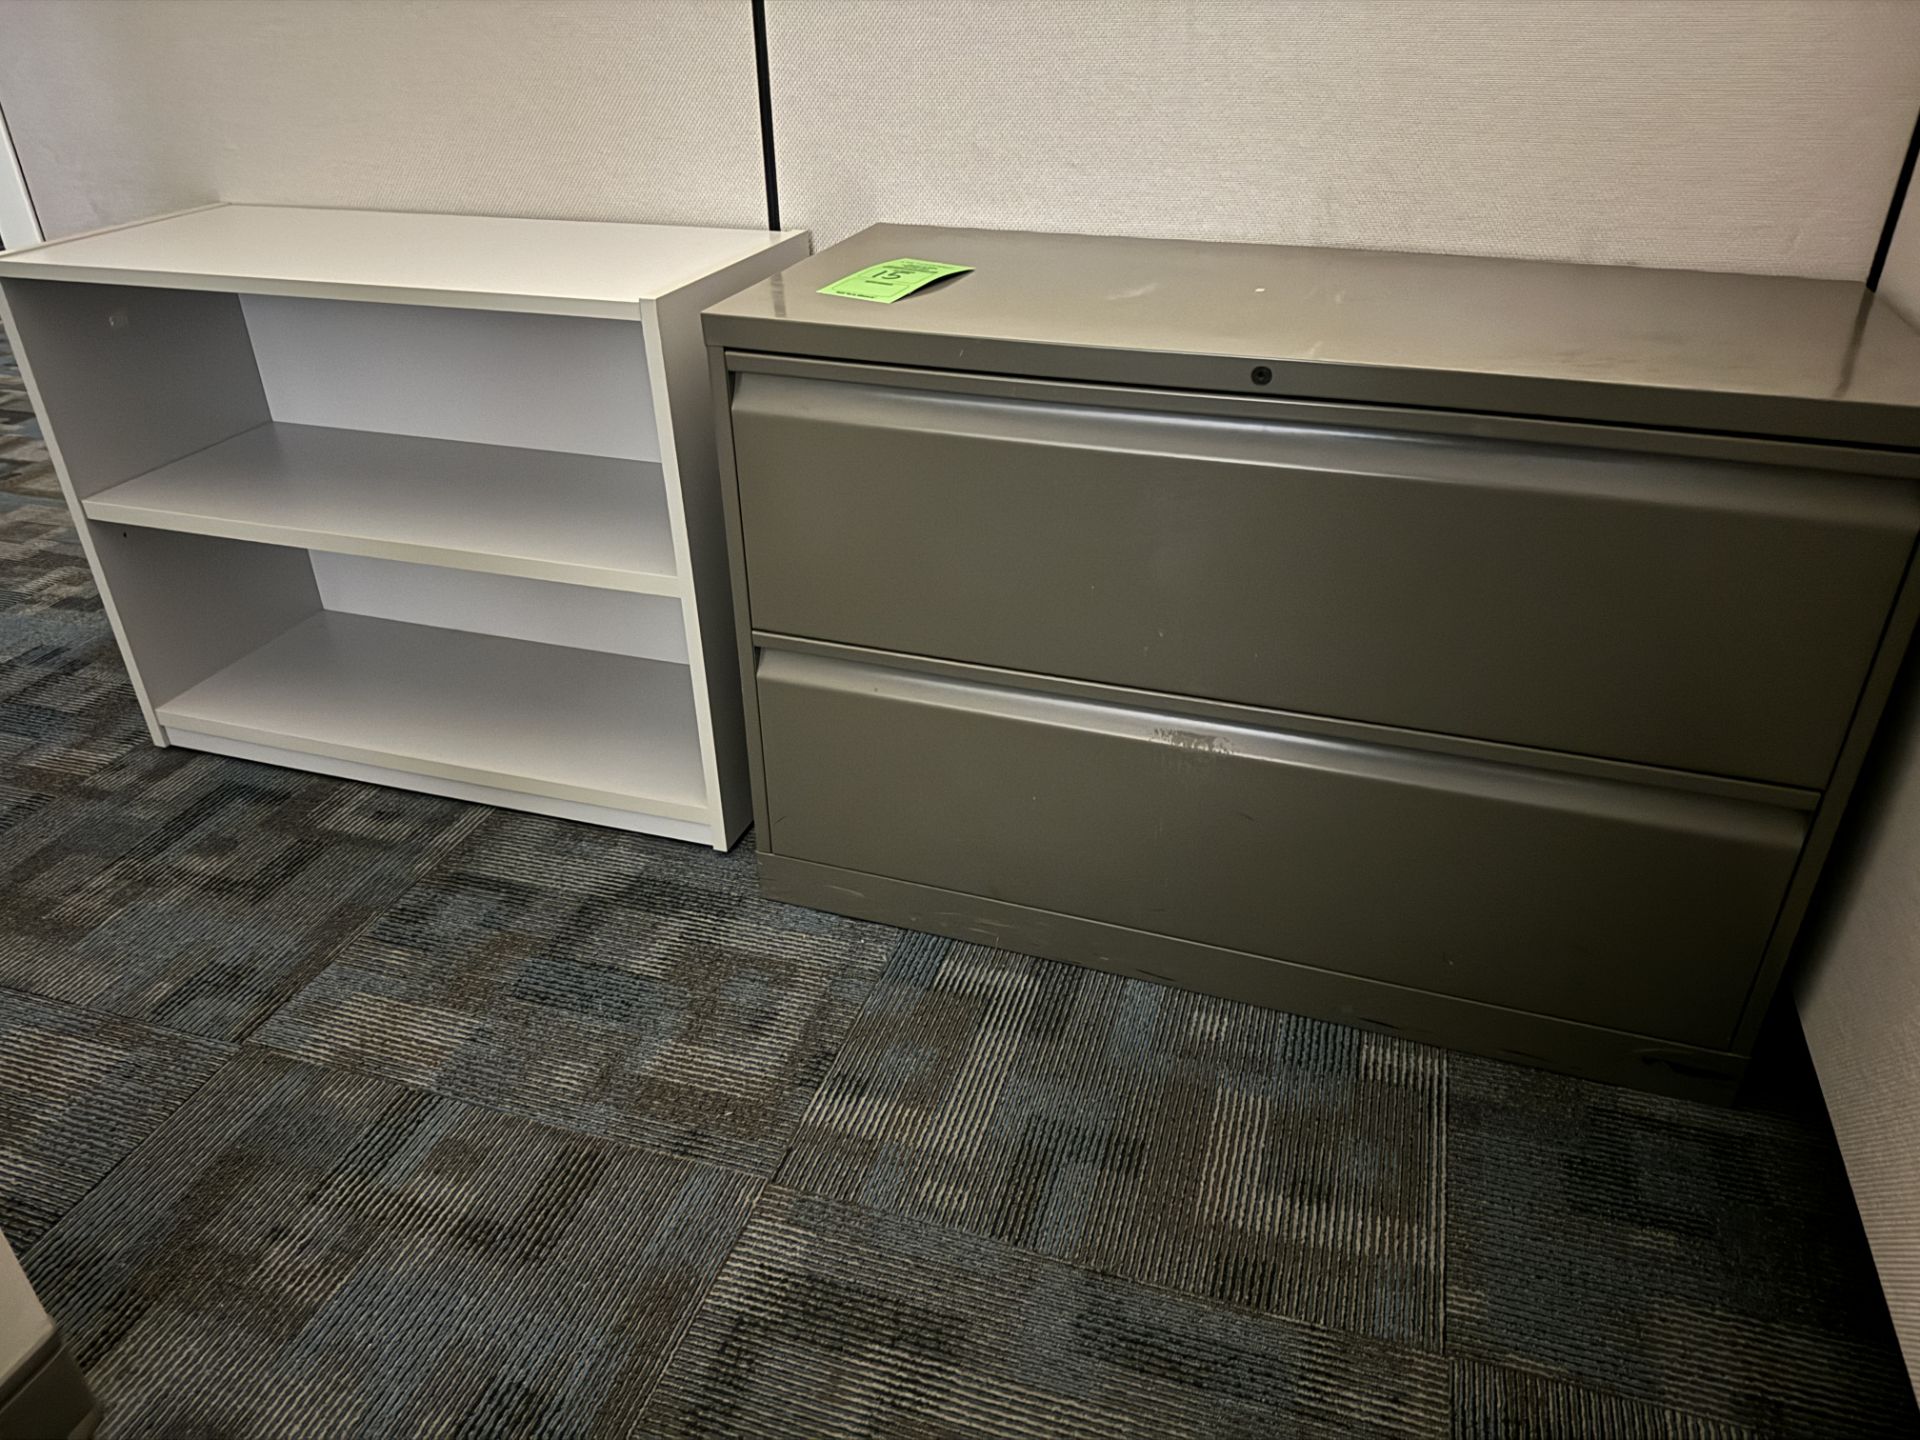 (2) OFFICE CABINETS (ZONE 1)